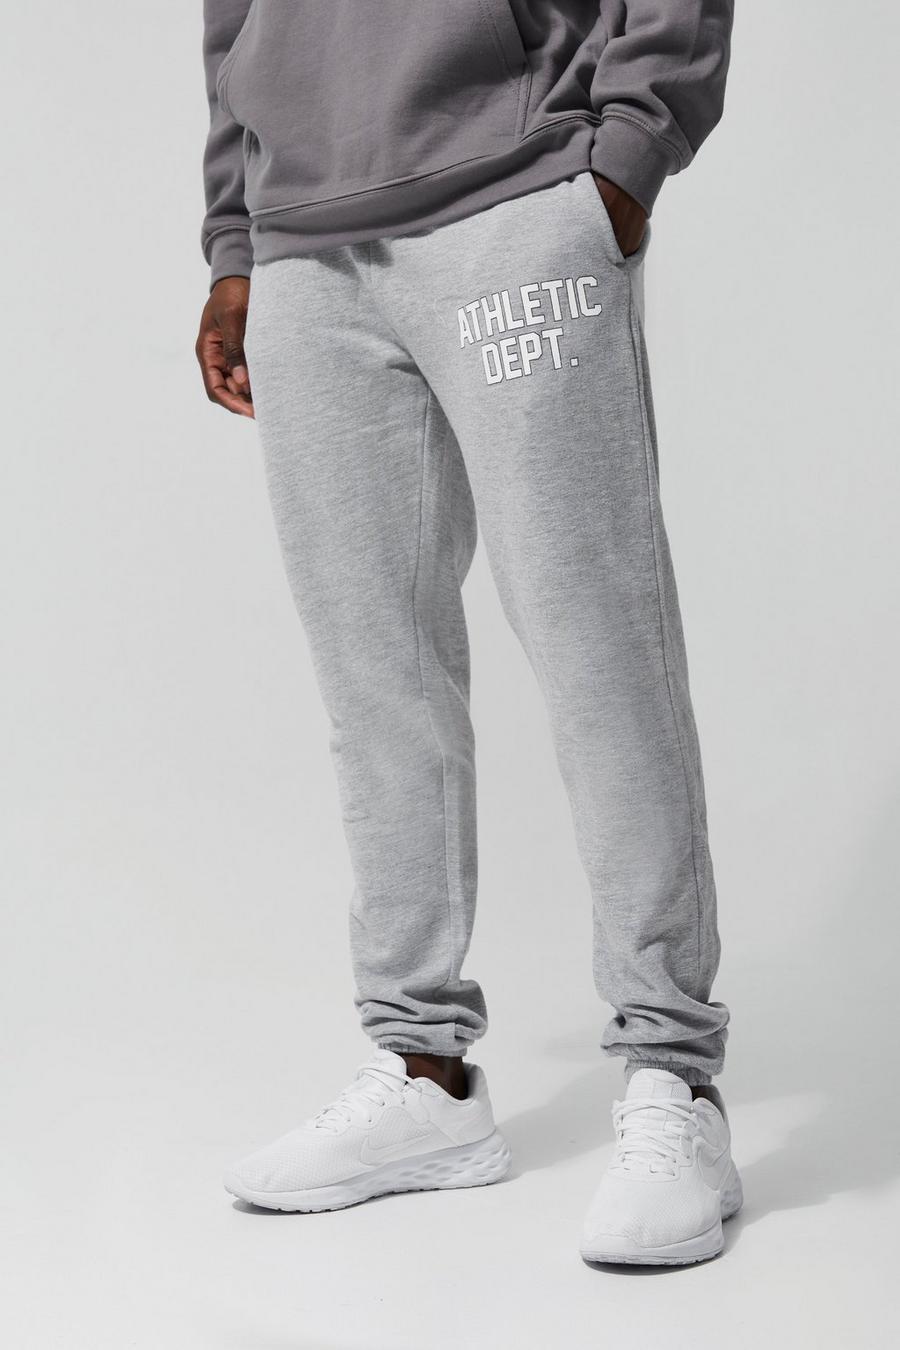 Grey Tall Man Active Athletic Dept. Joggers image number 1